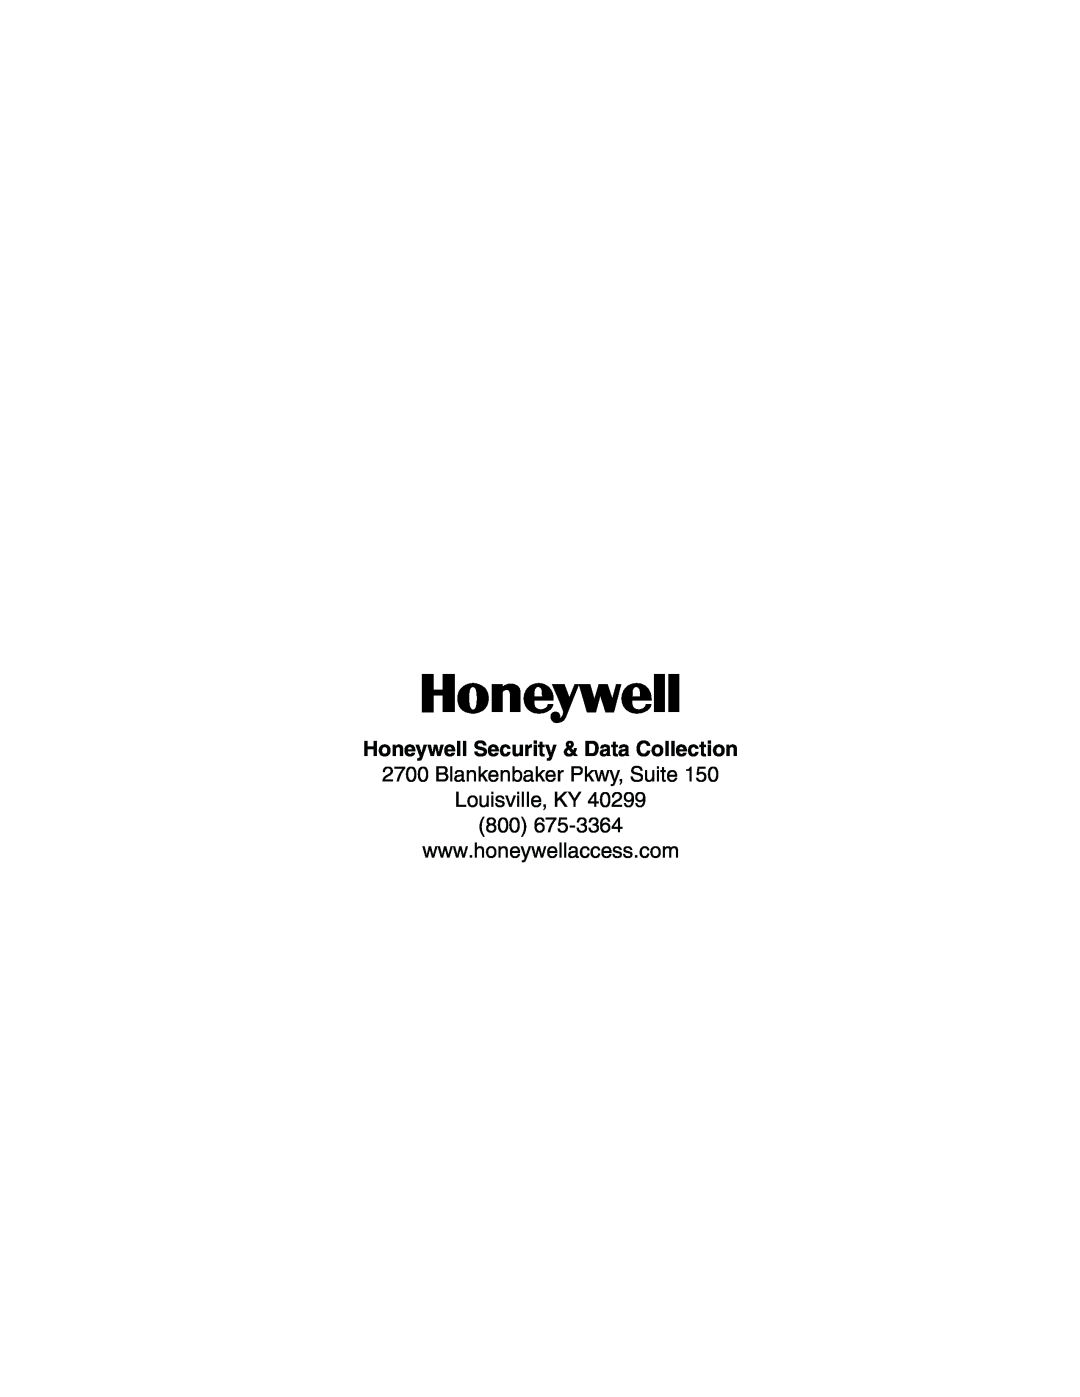 Honeywell PRO22ENC2, PRO22ENC1 Honeywell Security & Data Collection, Blankenbaker Pkwy, Suite Louisville, KY 